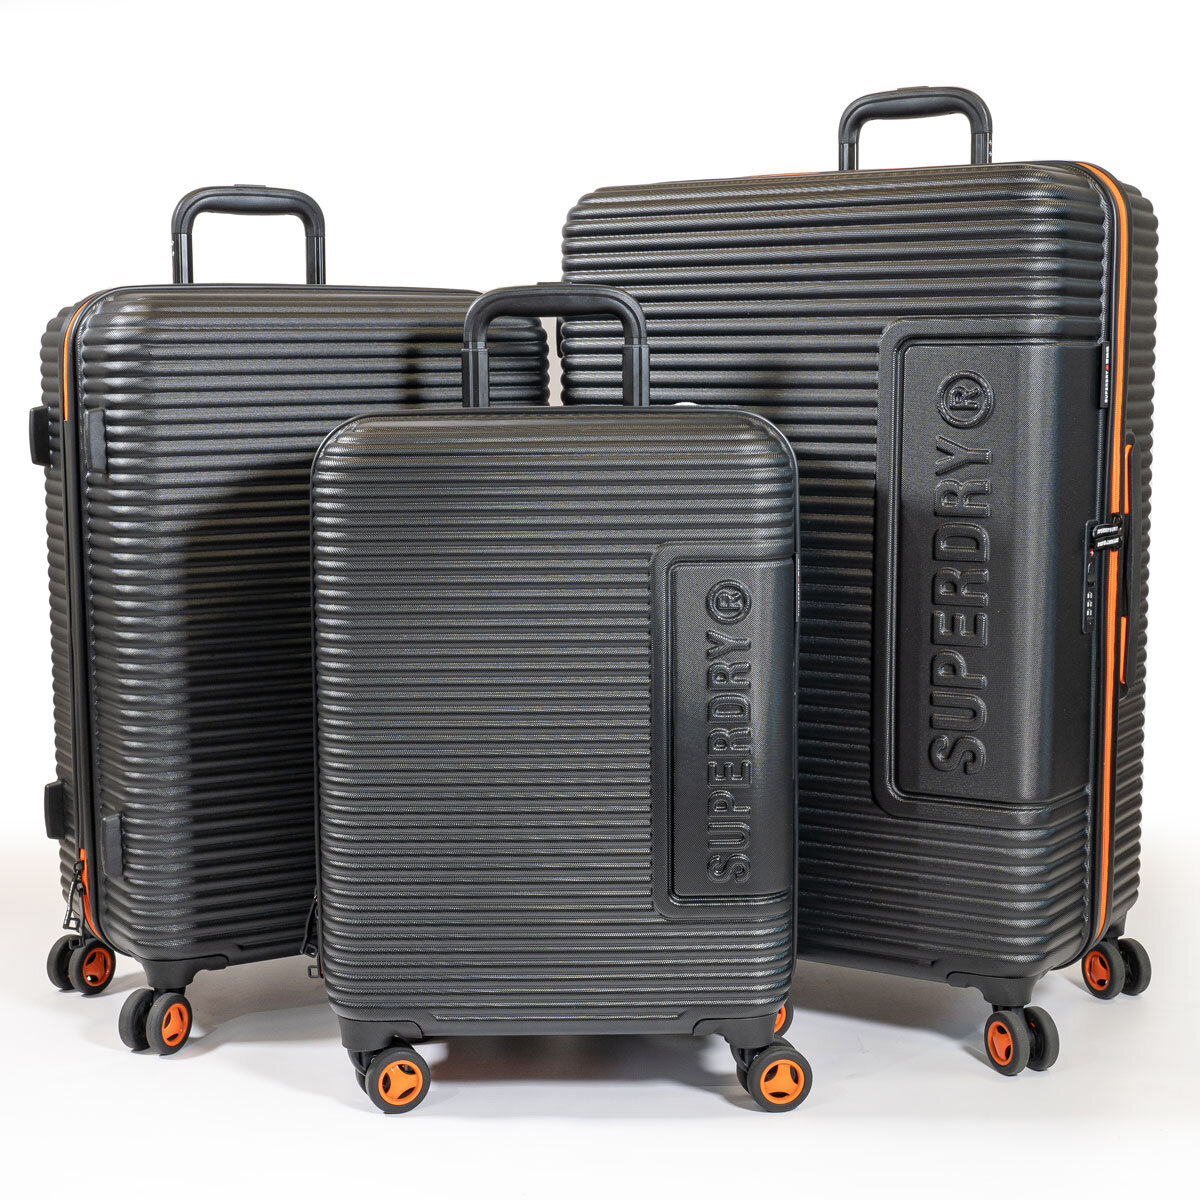 Superdry 3 Piece Hardside Luggage Set in 2 Colours | Cost...